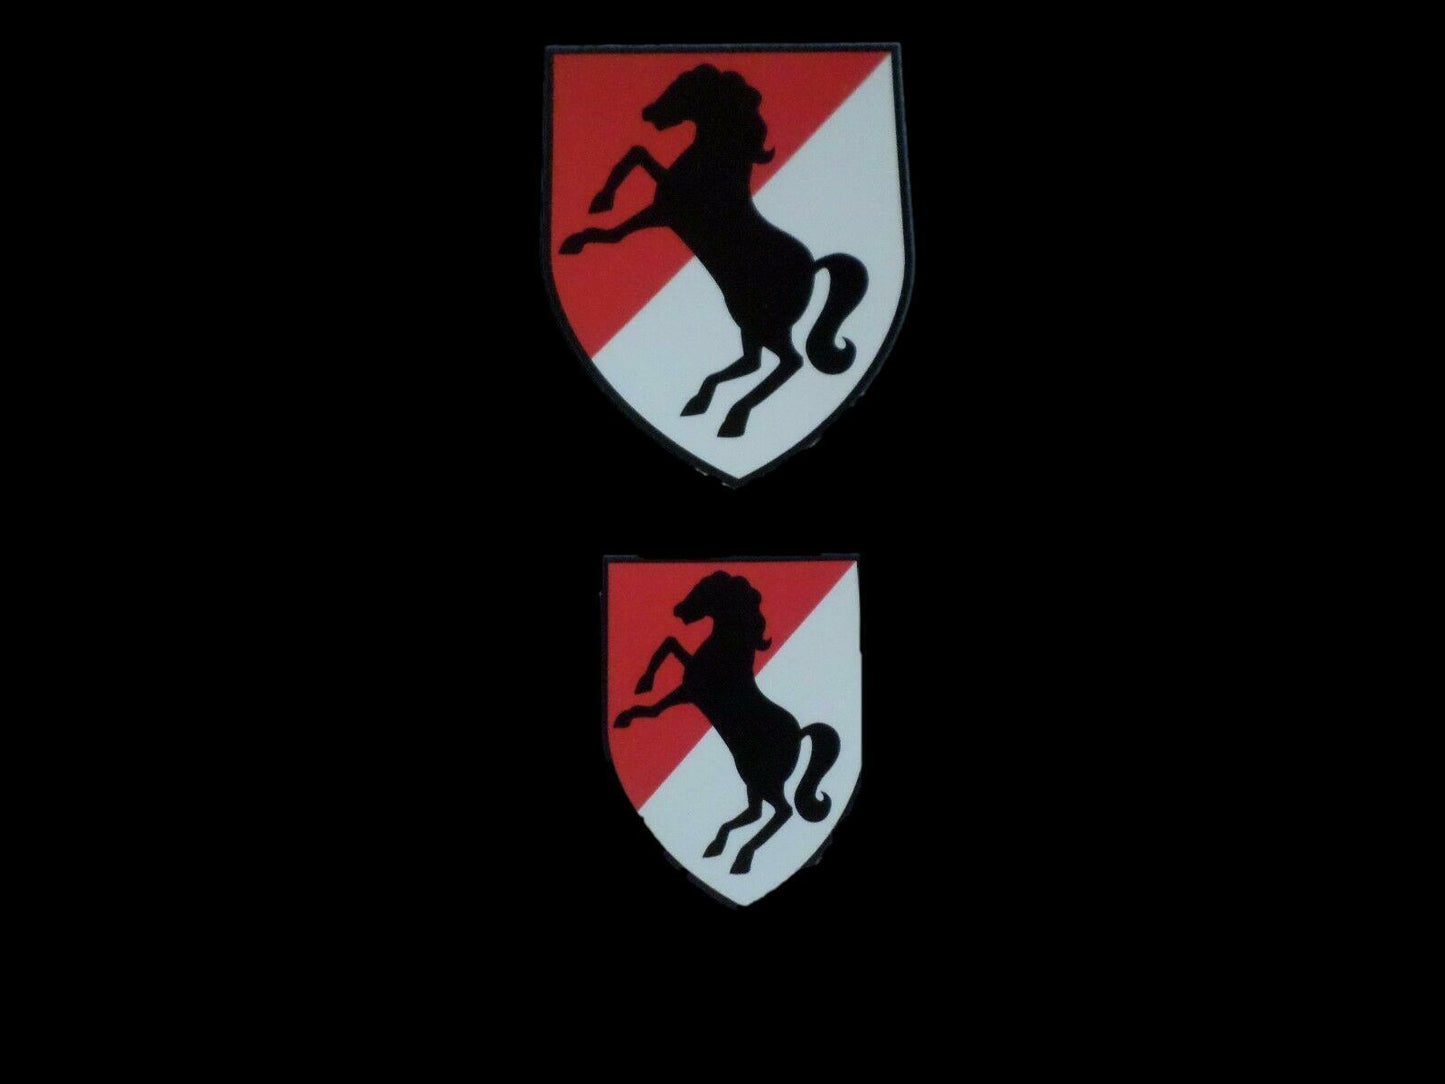 U.S MILITARY ARMY 11TH CAVALRY ARMORED WINDOW DECAL STICKER 2 ON ONE SHEET